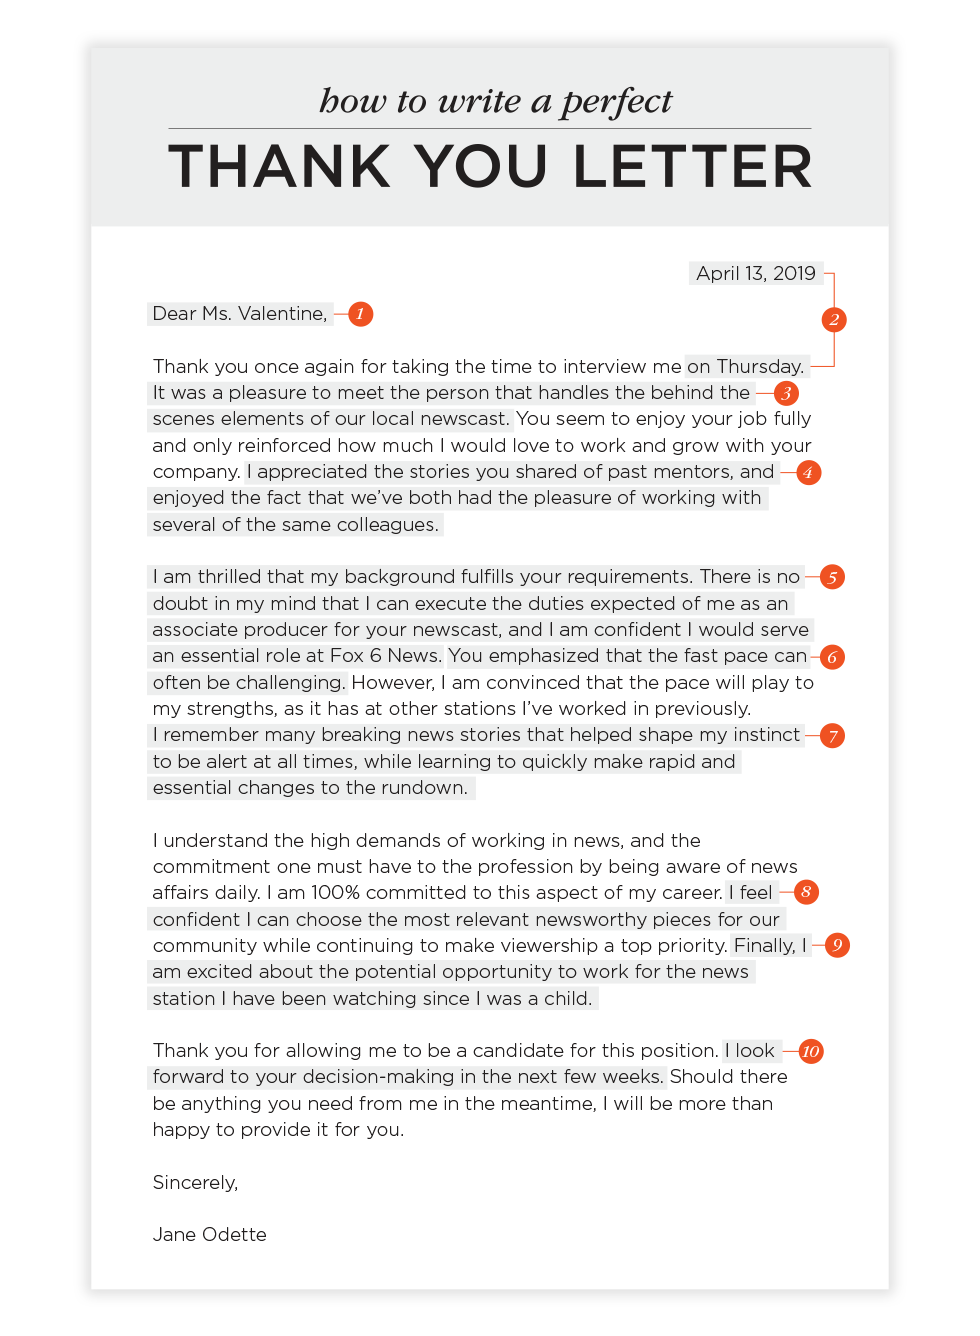 Sample Thank You Letter After Interview Multiple Interviewers from www.shutterfly.com